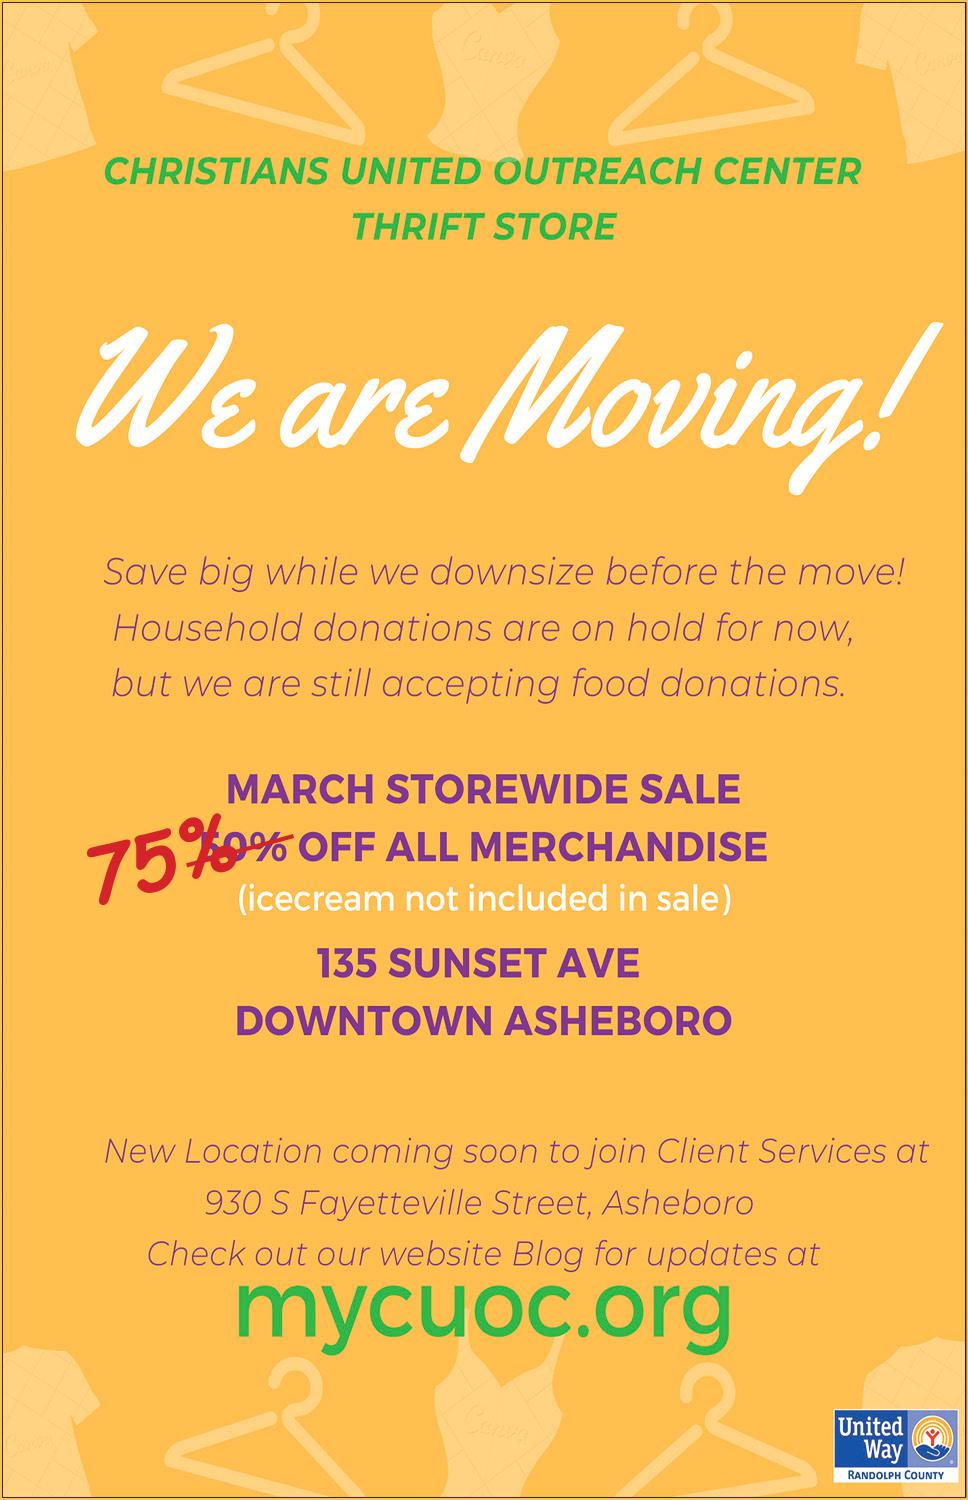 The CUOC Thrift Store is Moving!